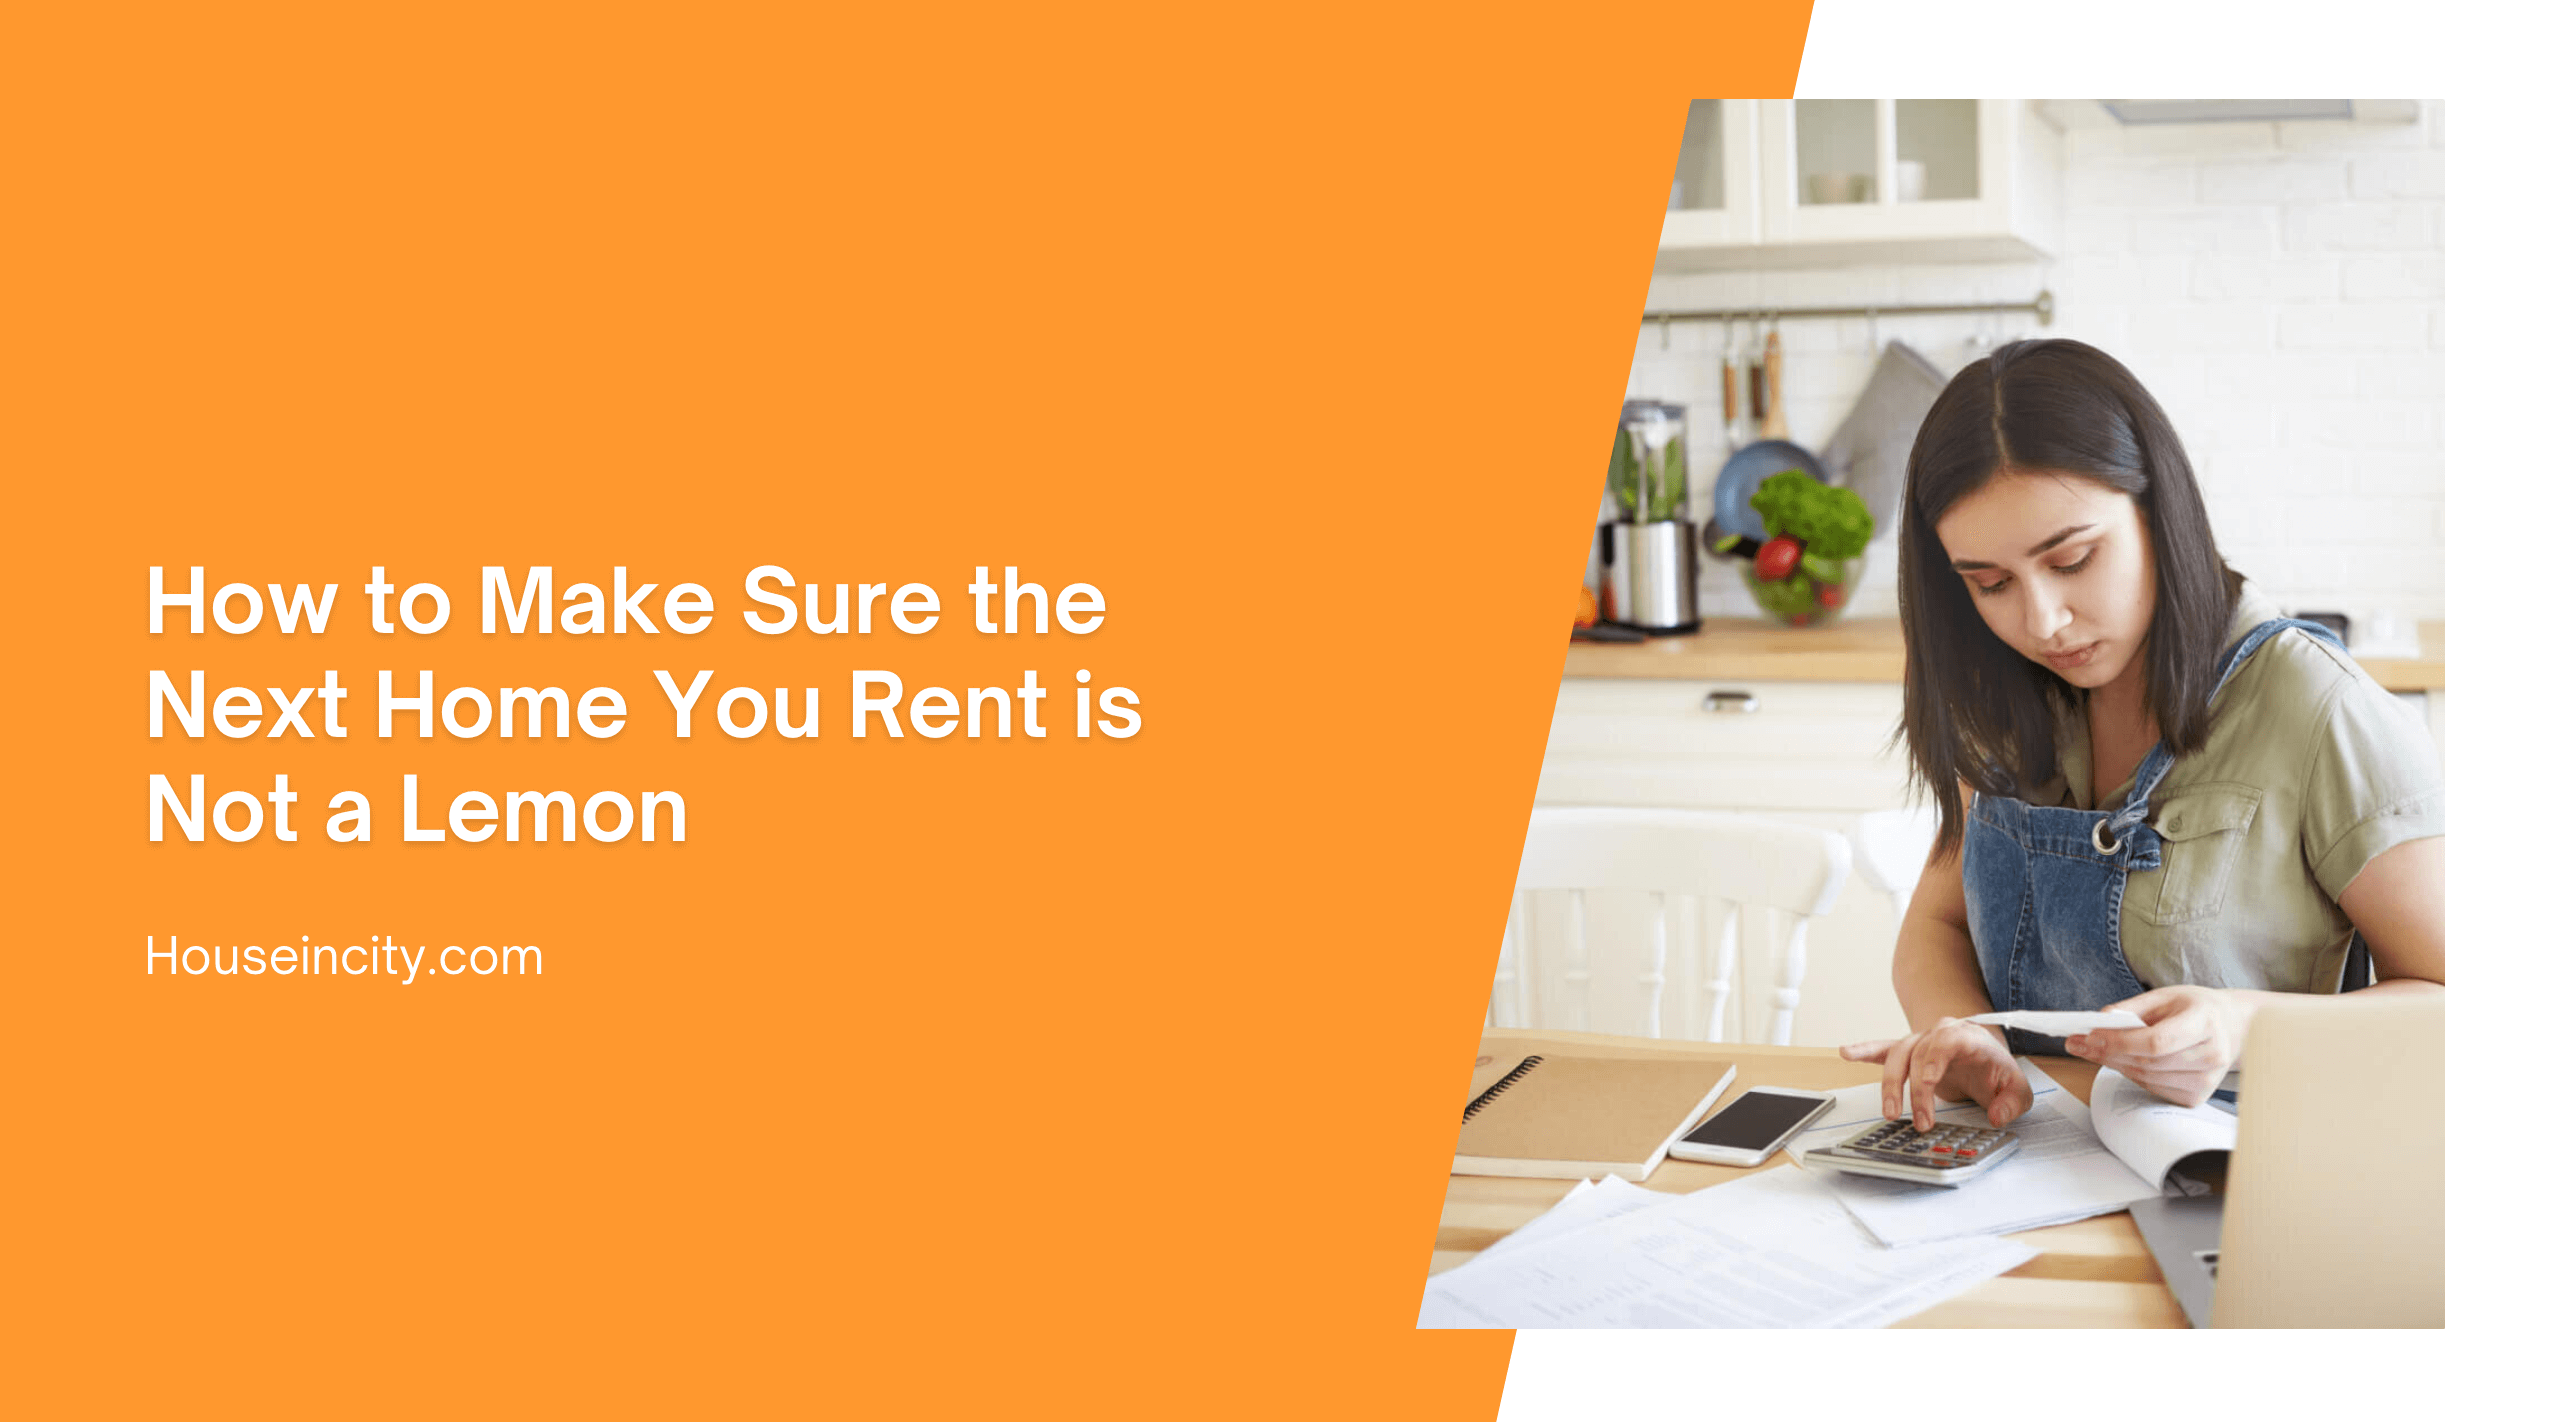 How to Make Sure the Next Home You Rent is Not a Lemon